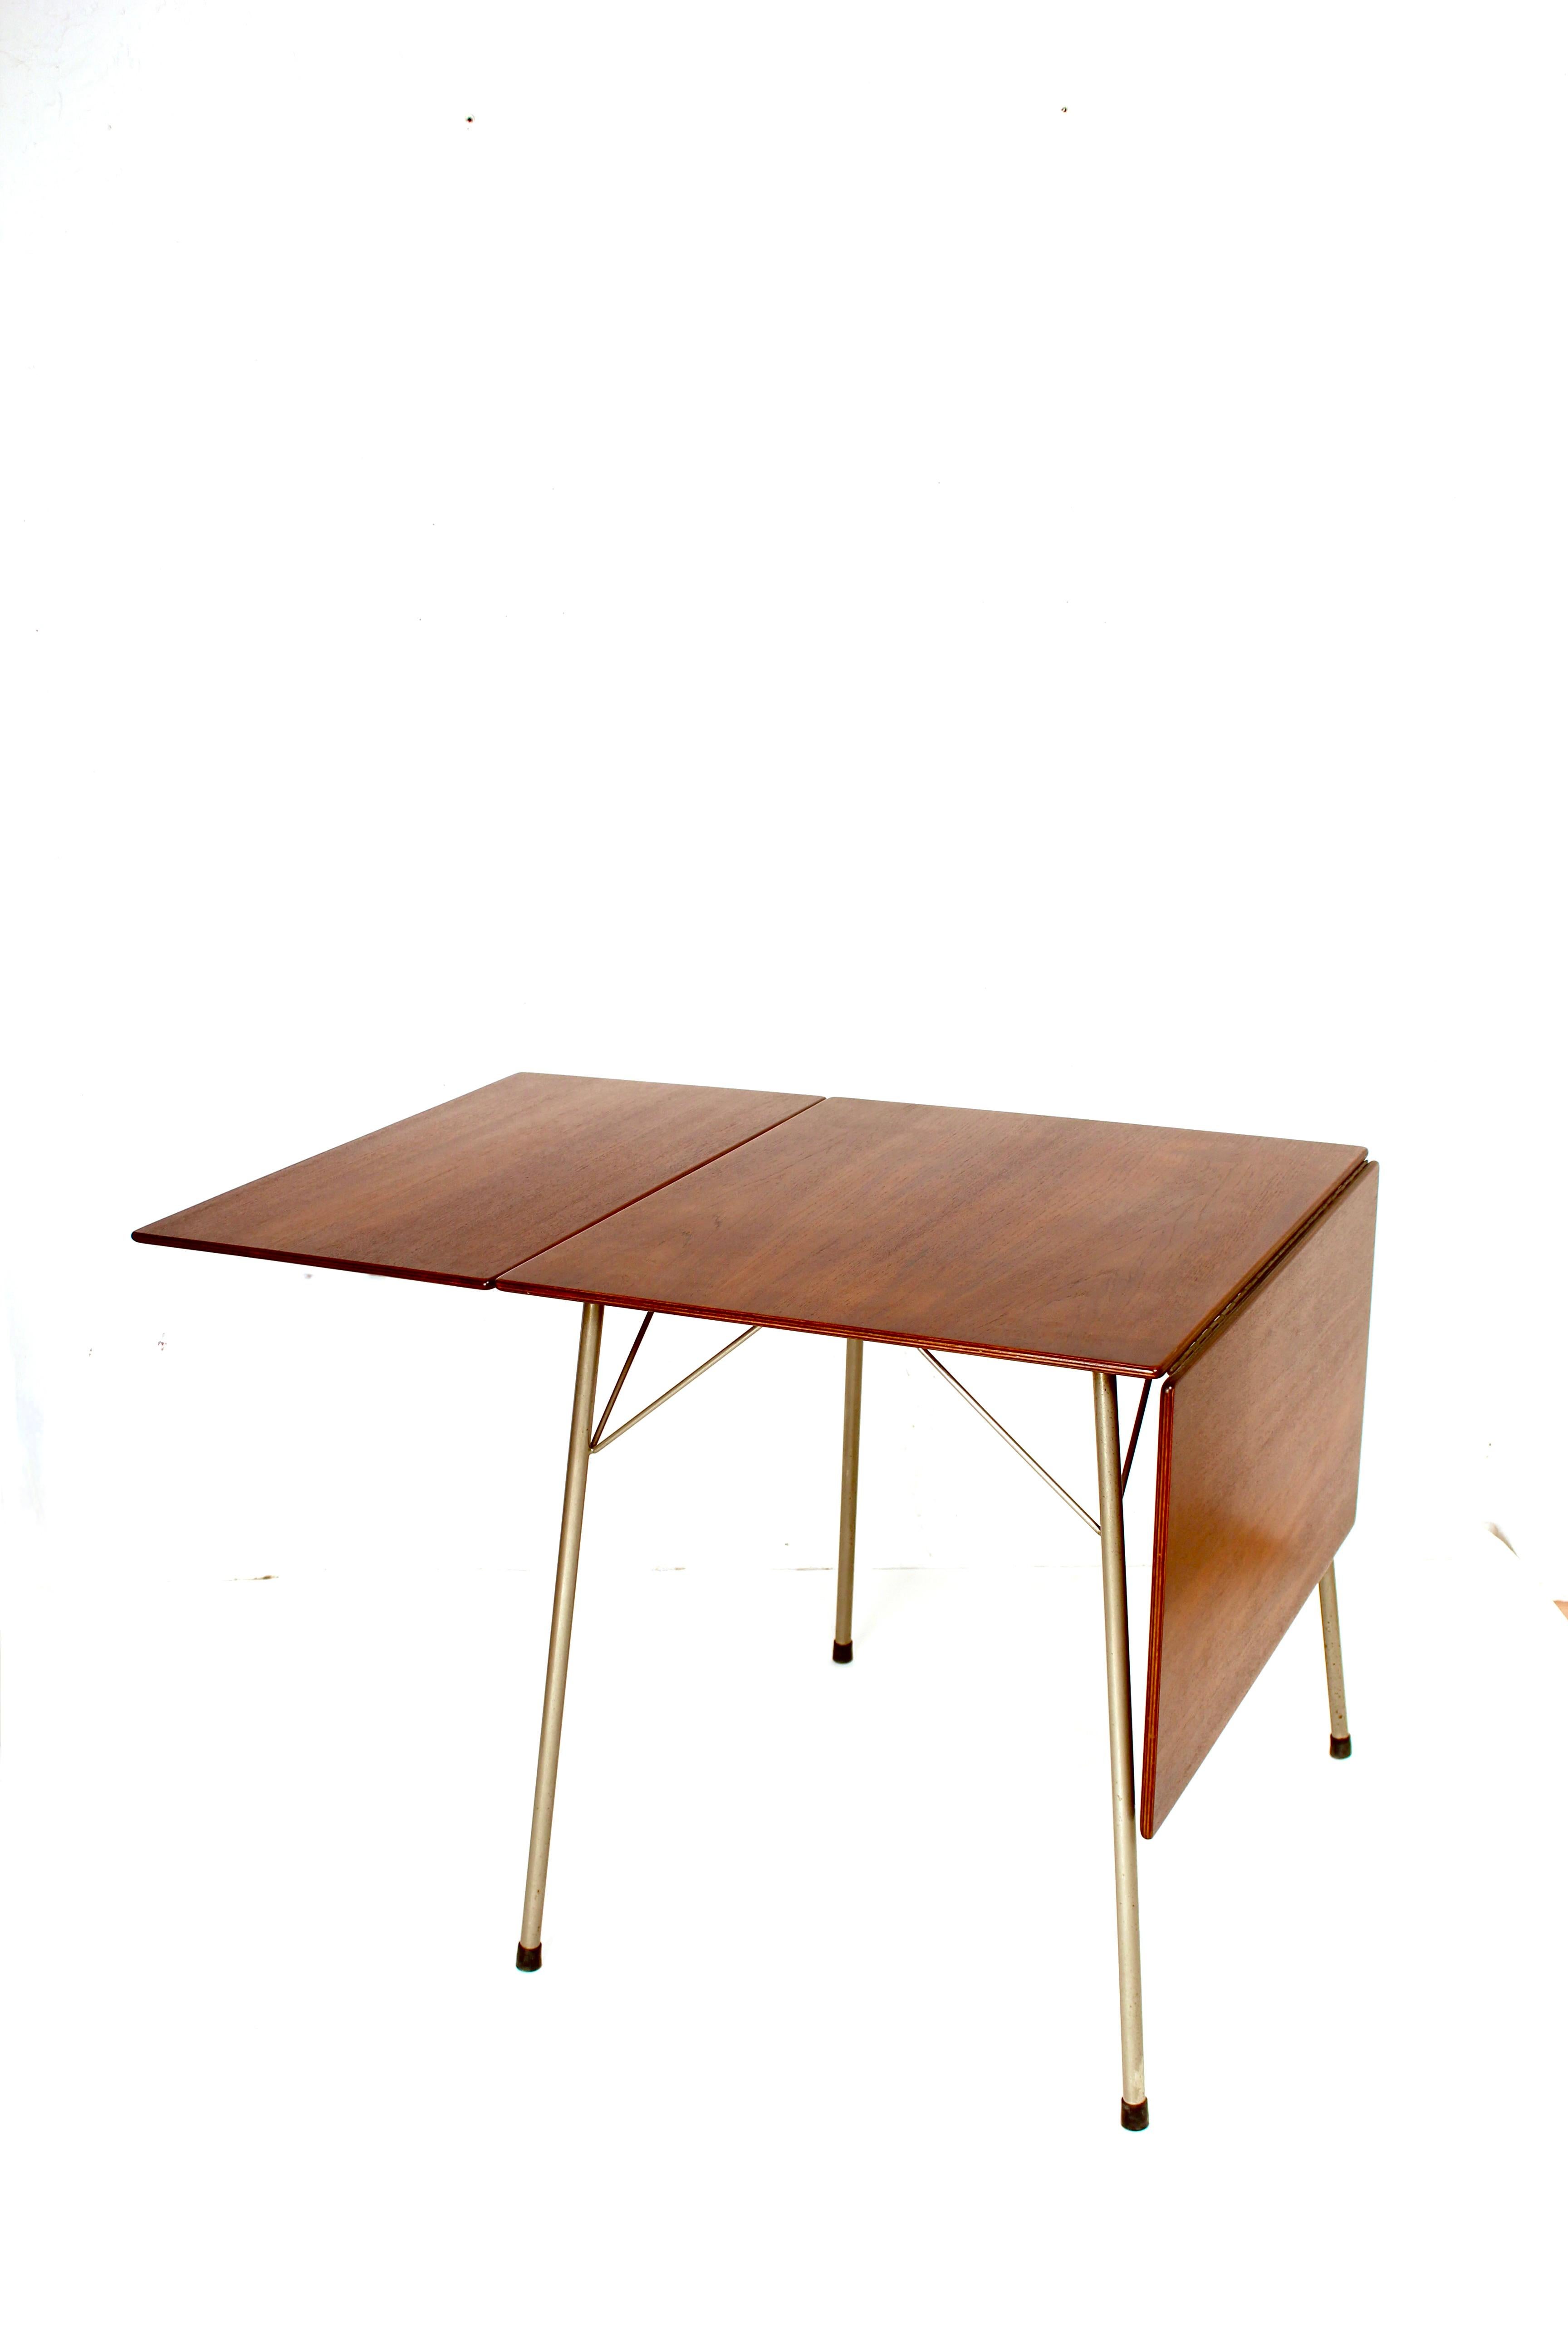 Nice small drop-leaf table model 3601 designed by Arne Jacobsen for Fritz Hansen, Denmark, 1952. This table has a teak wooden foldable top and chrome-plated tubular metal legs. This rare table is very nice sized and easy to fold. When fully extended